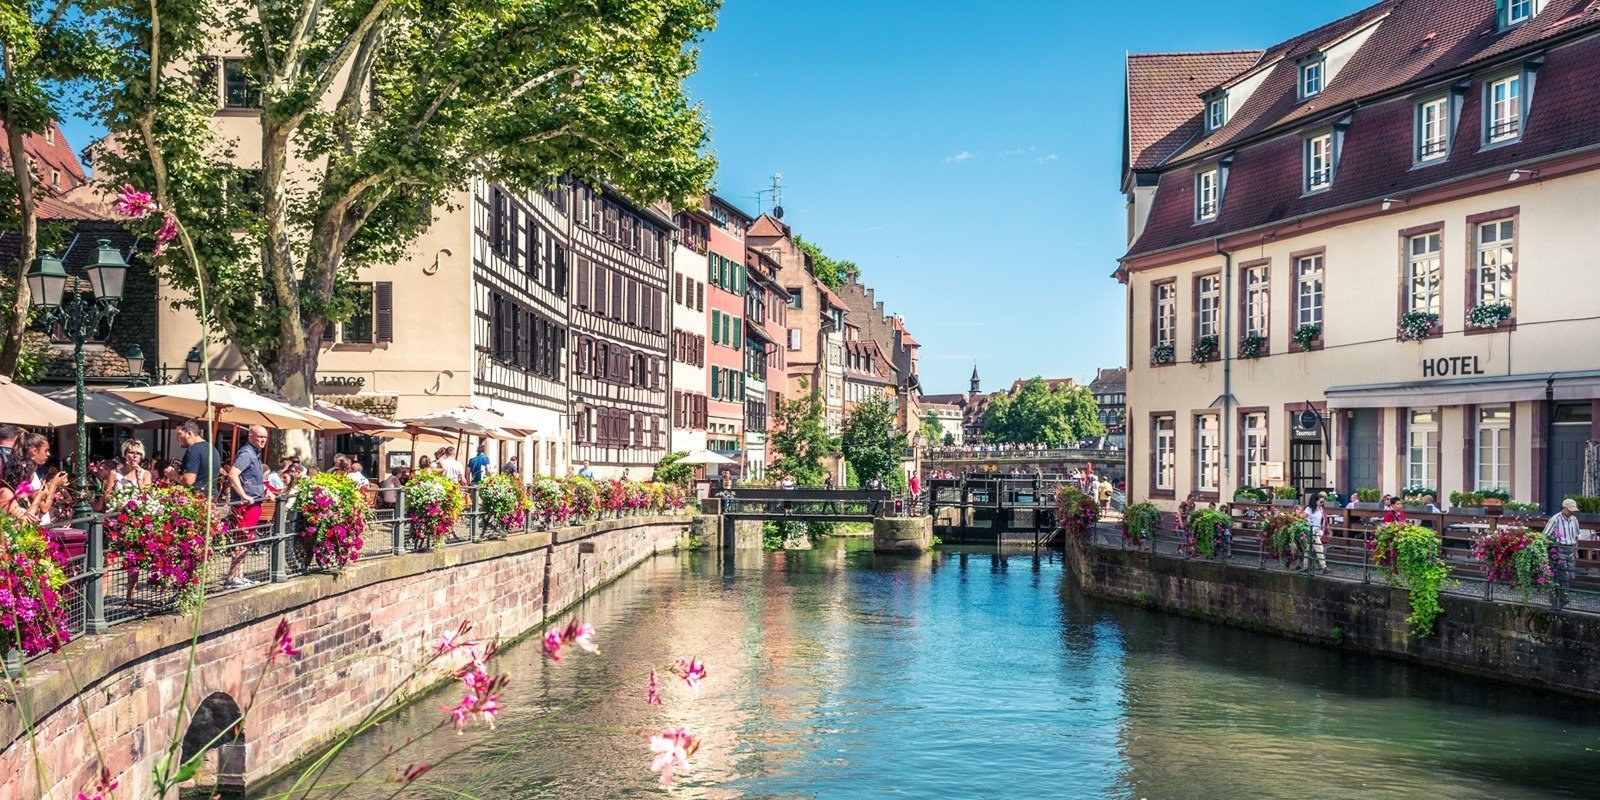 Little-Holidays-Guide-Where-to-stay-in-Strasbourg-France